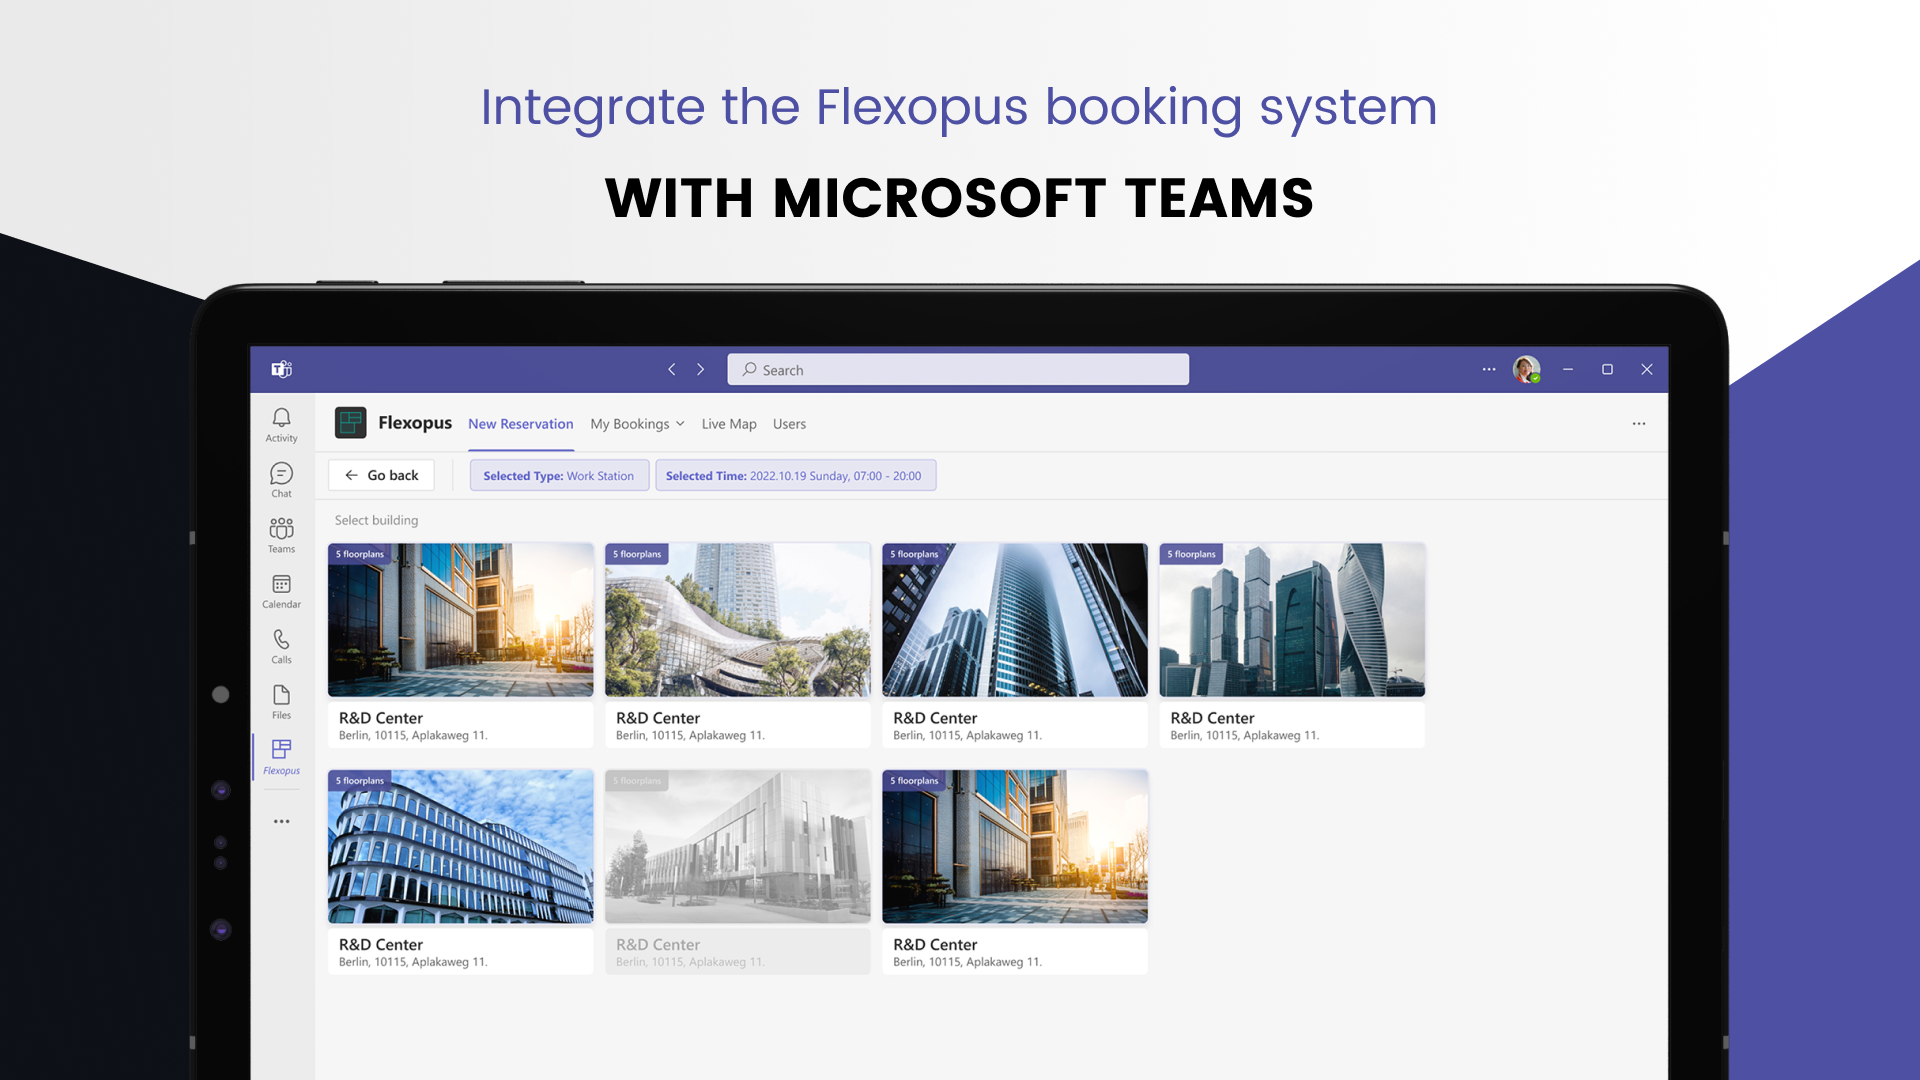 Microsoft Teams Integration to make booking objects even easier. No need to even open Flexopus in order to book desks, meeting rooms, and parking lots!